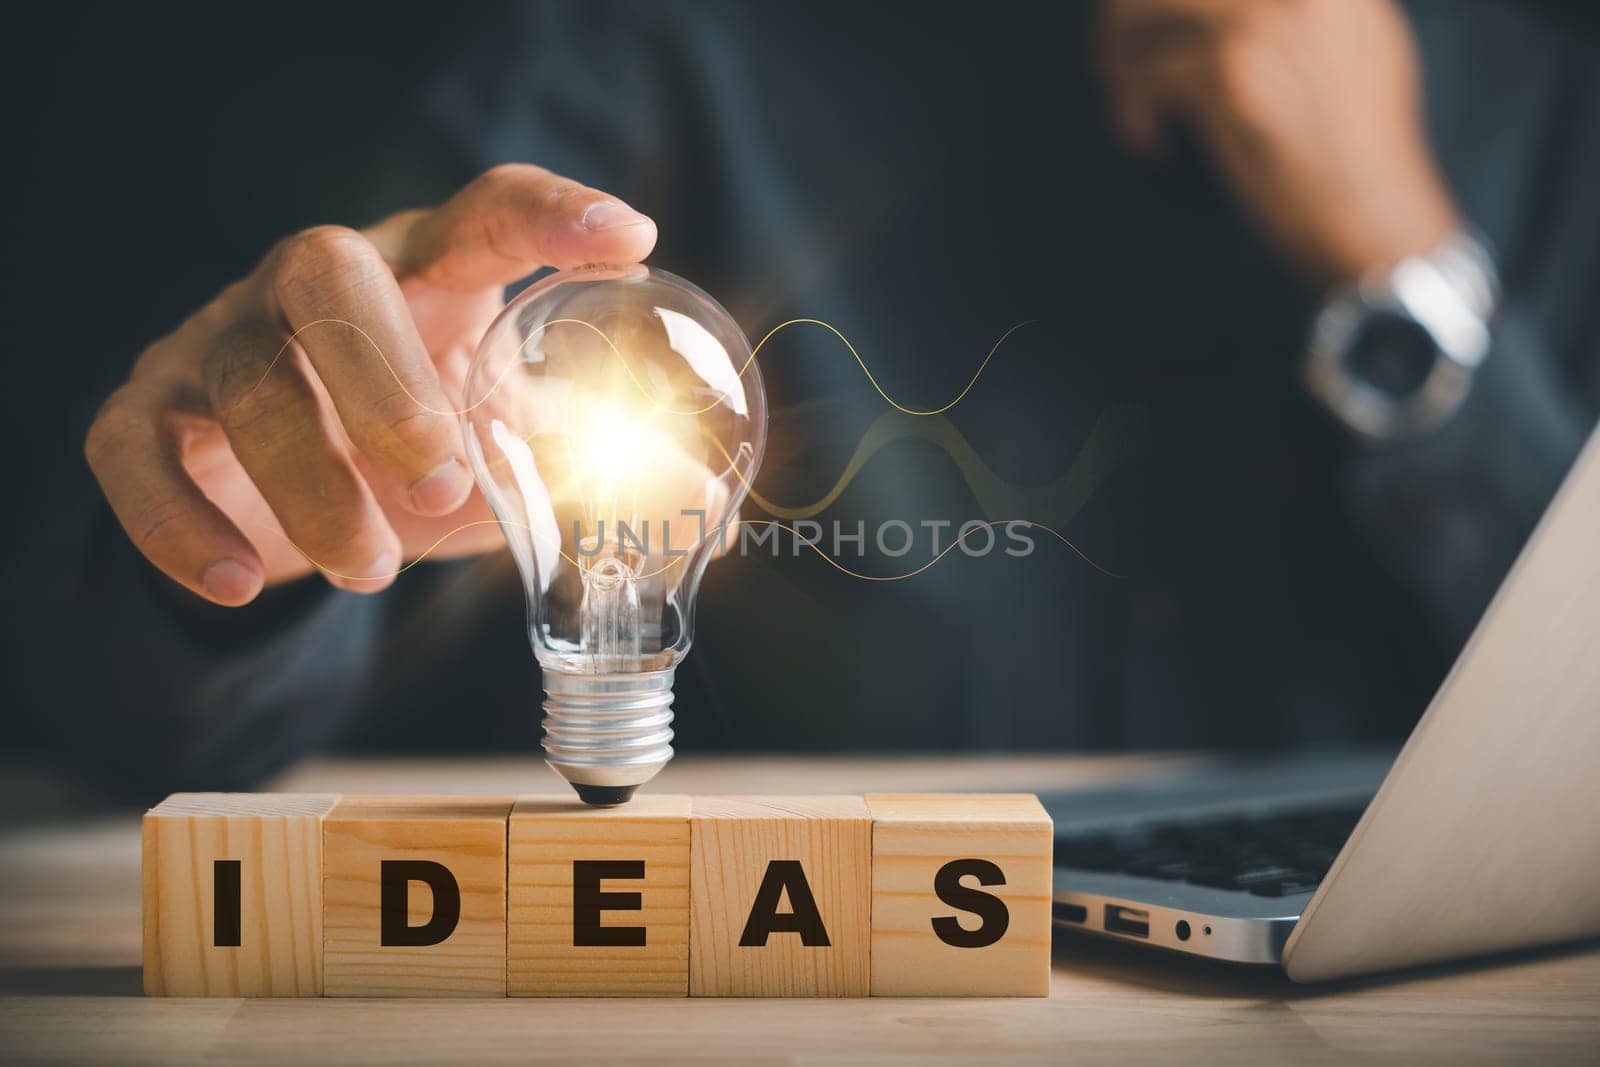 Hand holding light bulb with wooden block displaying word Ideas by Sorapop